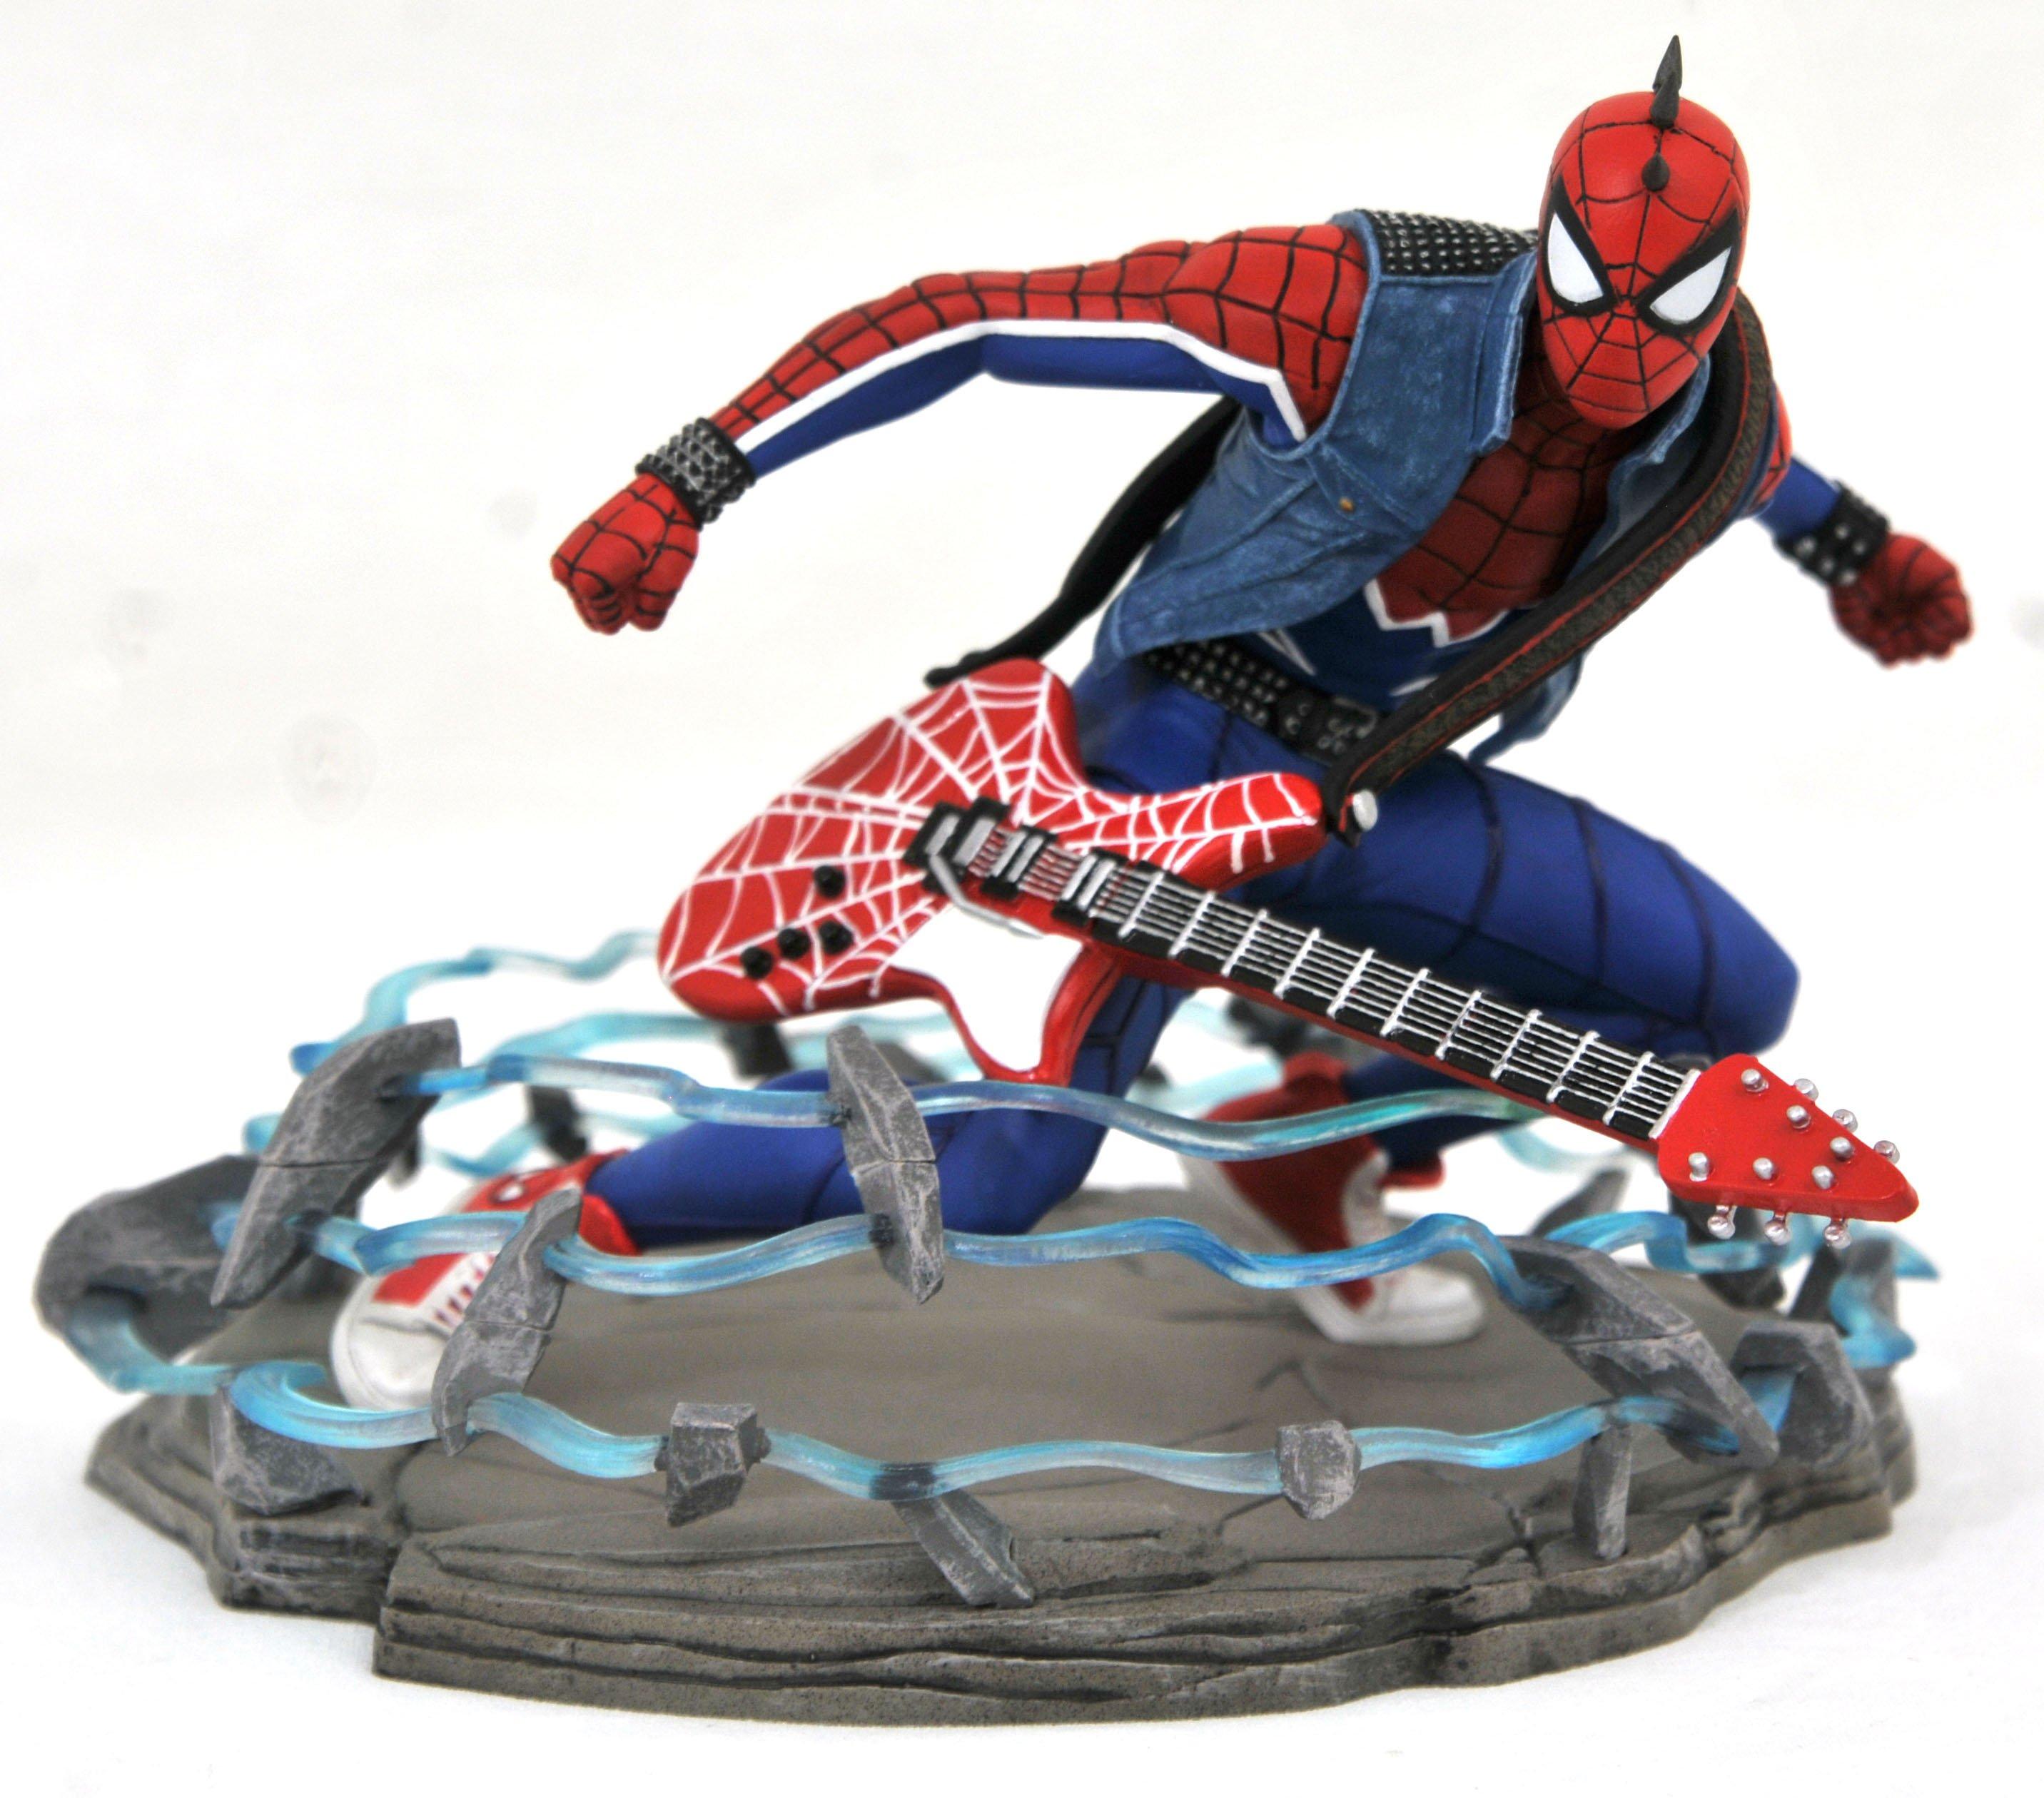 spiderman toys and games